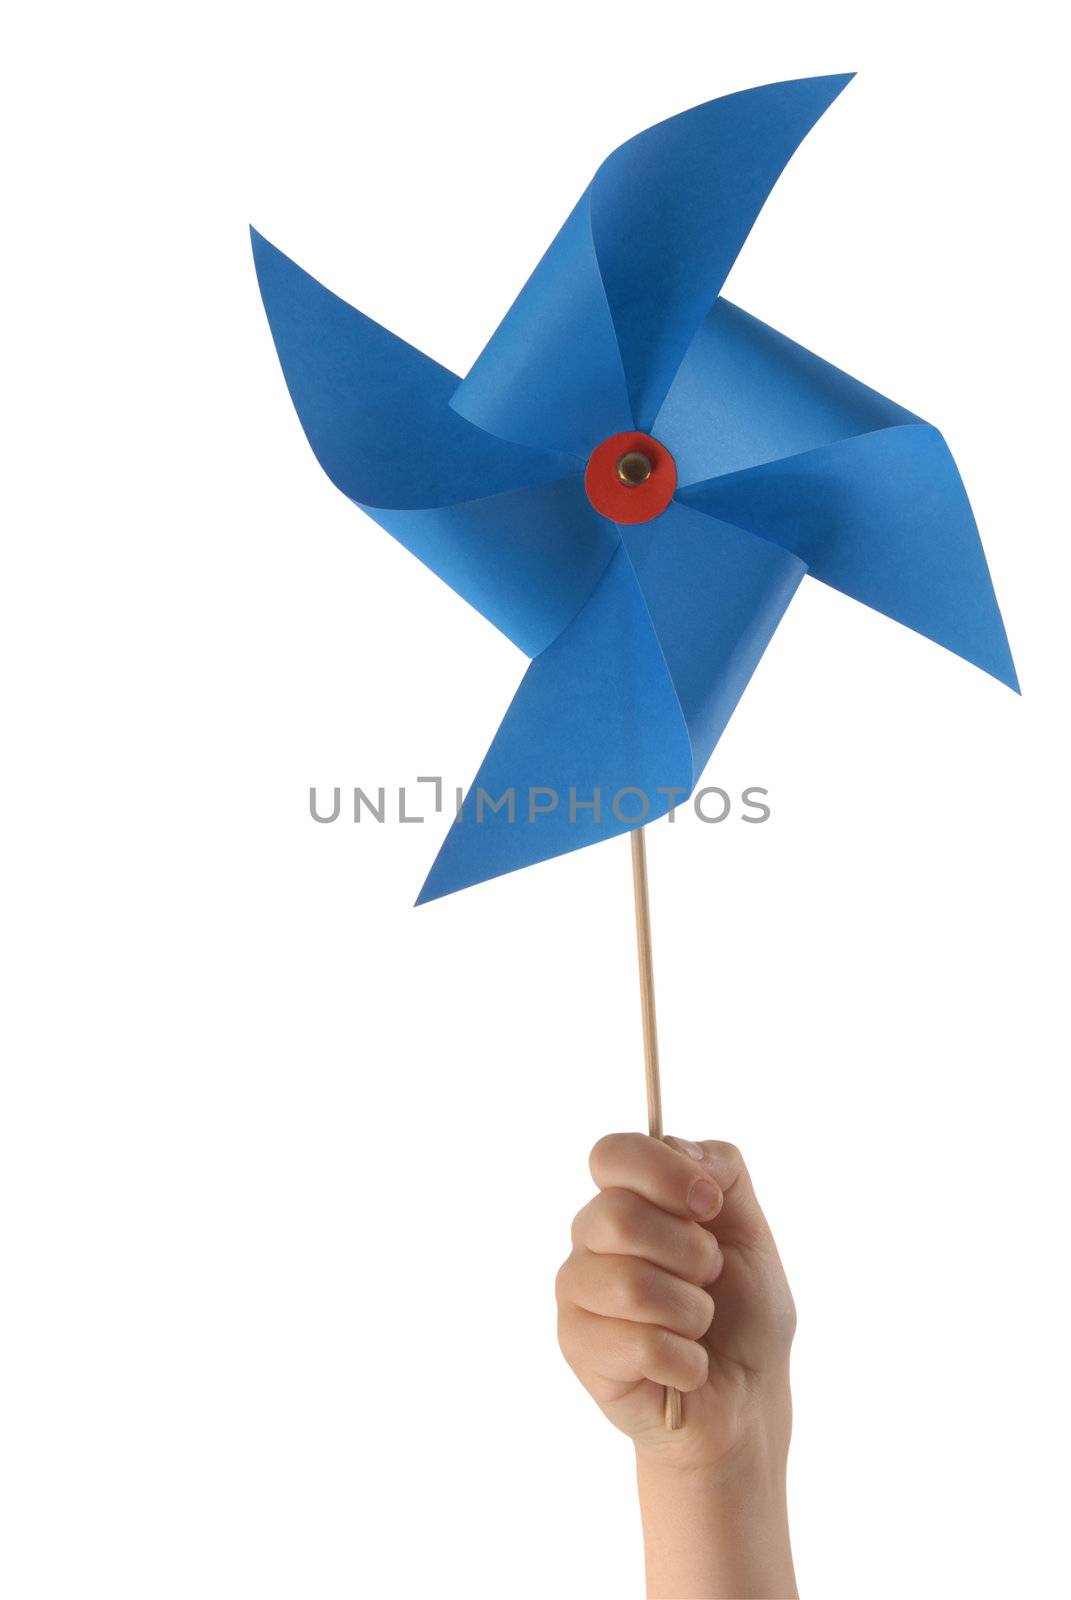 Kid hand holding a blue pinwheel close up isolated on white background. 
Included clipping path, so you can easily cut it out and place over the top of a design.